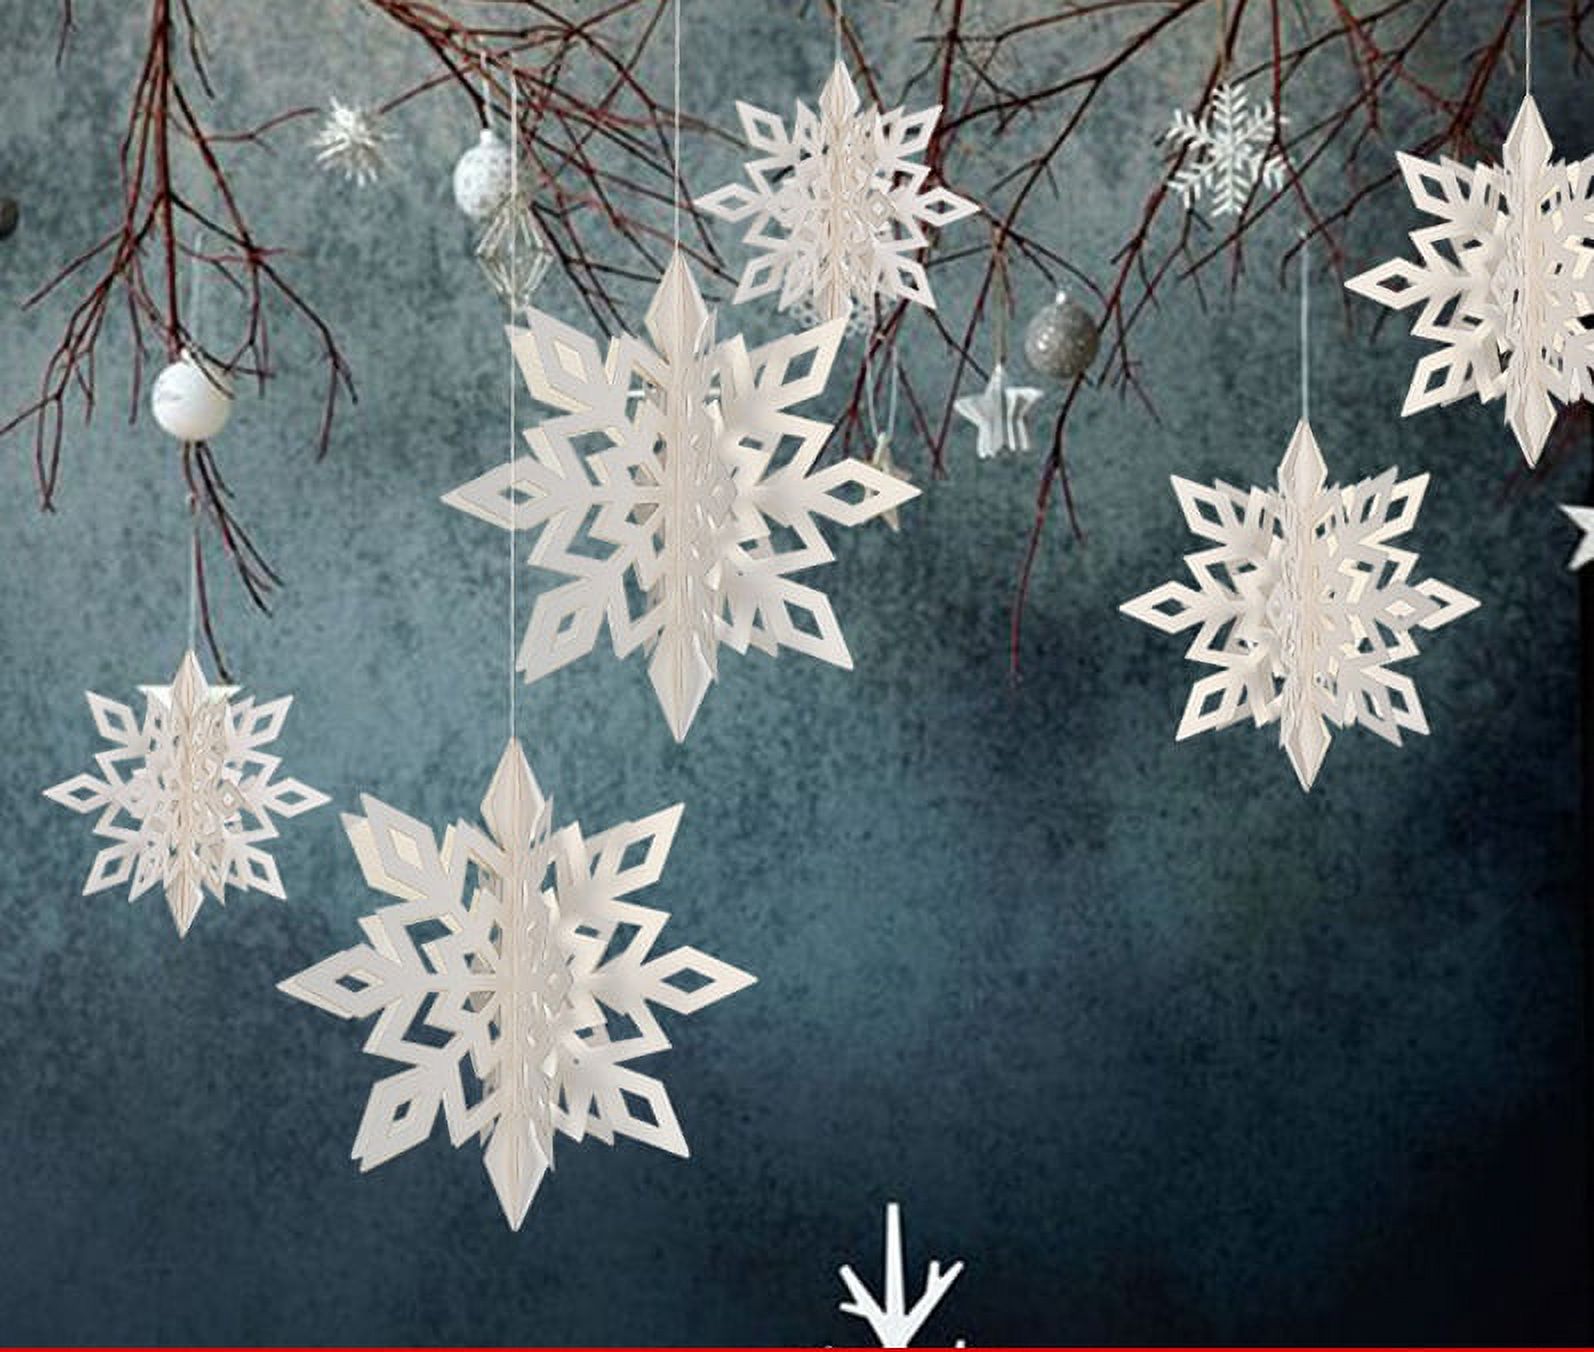 6 Pieces Hanging Snowflake Decorations Ornaments 3D Large White Paper Snowflakes Garland Snow Flakes for Christmas Tree Wedding Holiday New Year Room